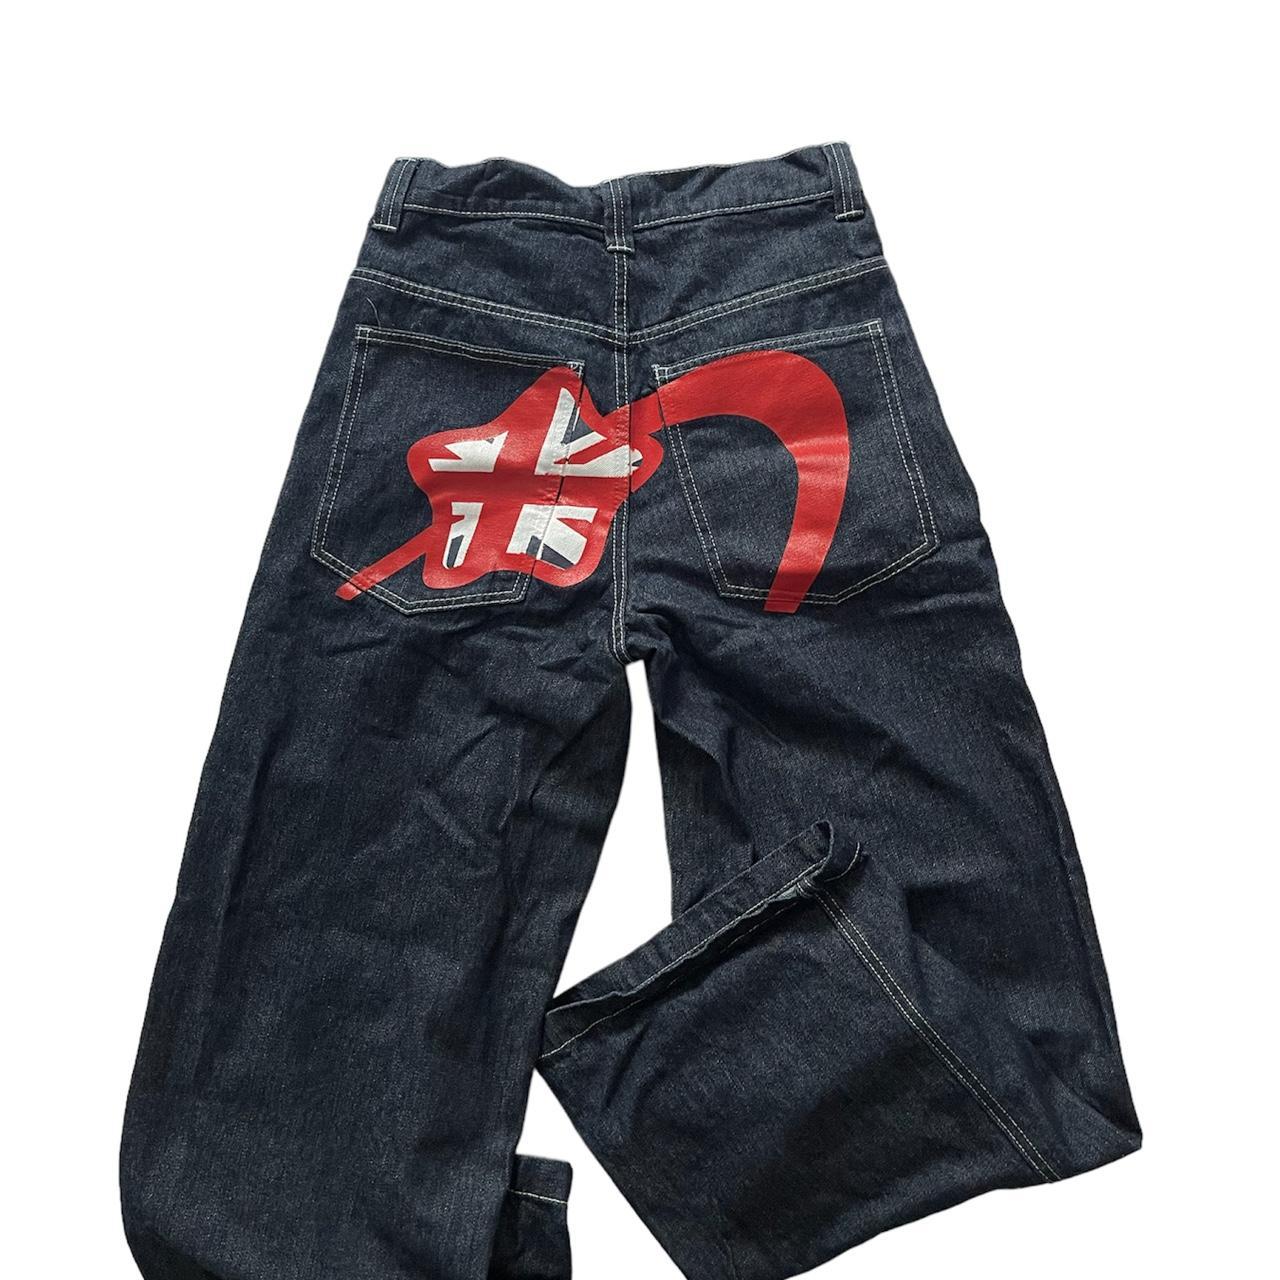 Jaded London Men's Navy and Red Jeans | Depop